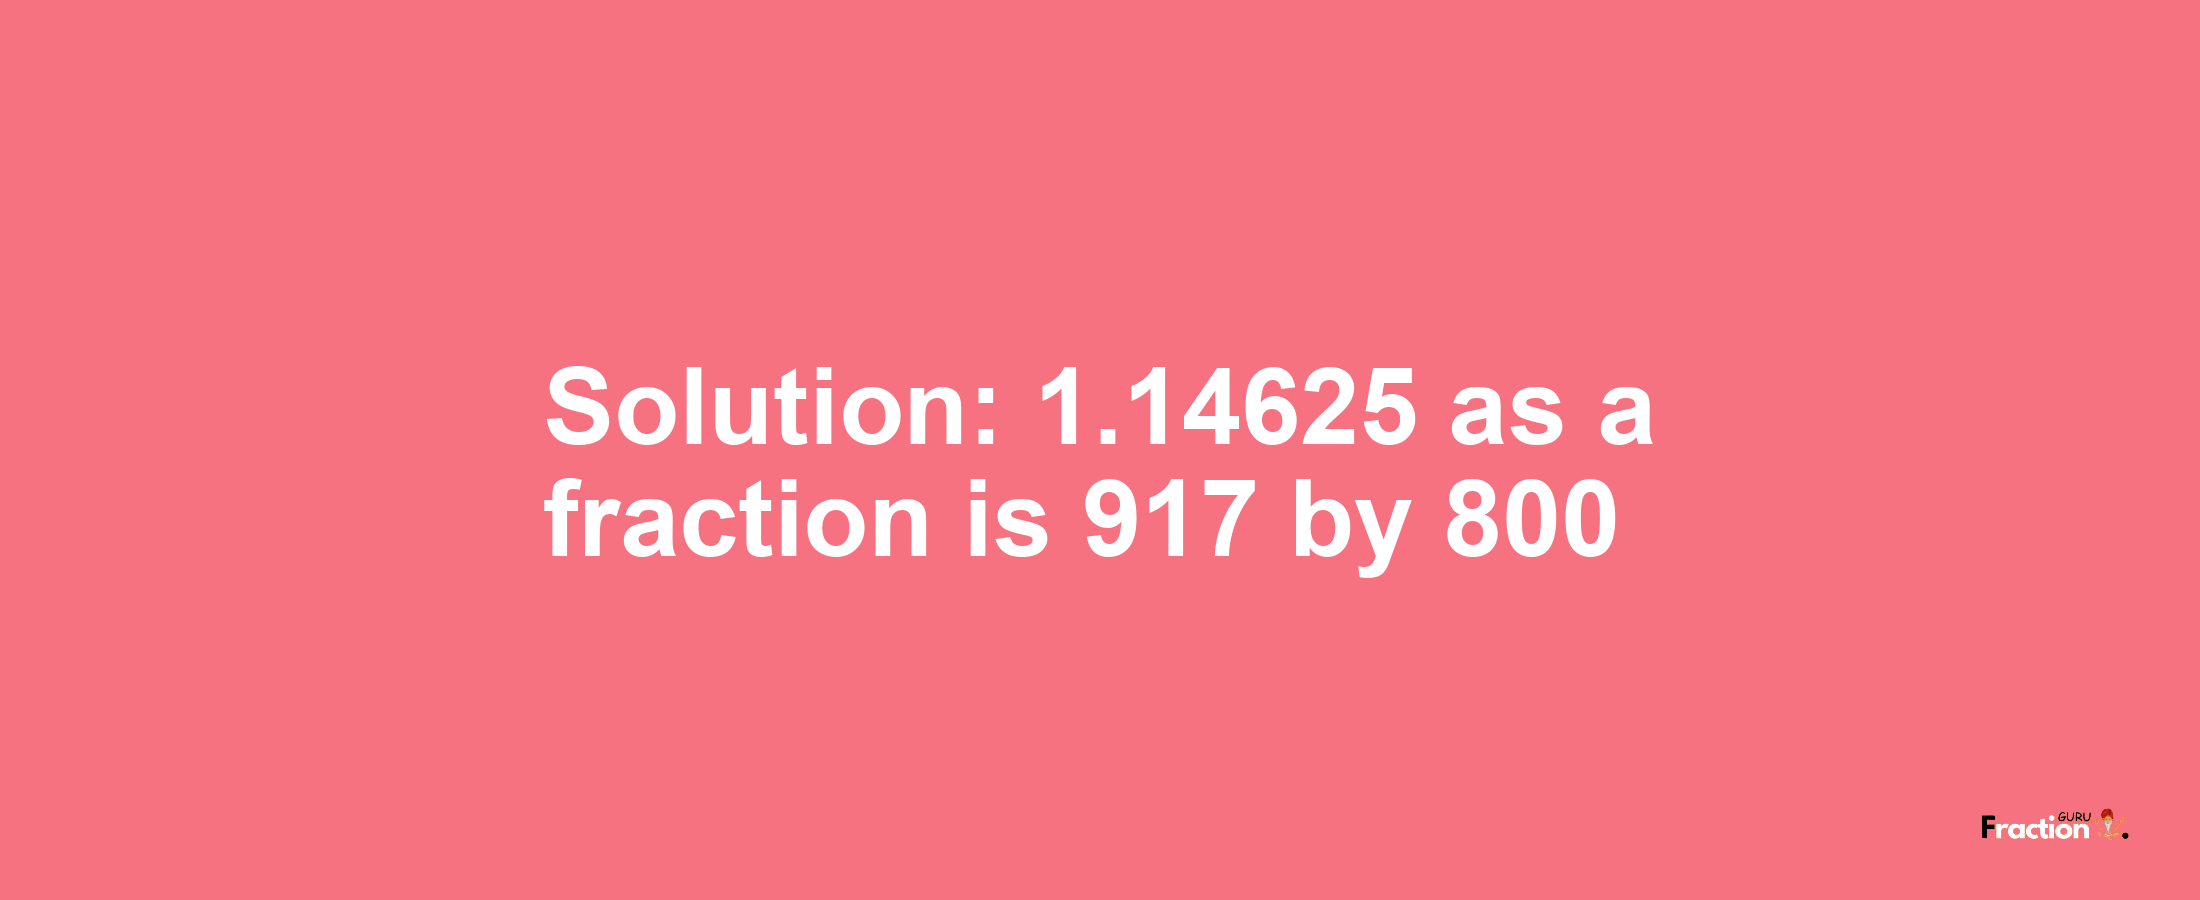 Solution:1.14625 as a fraction is 917/800